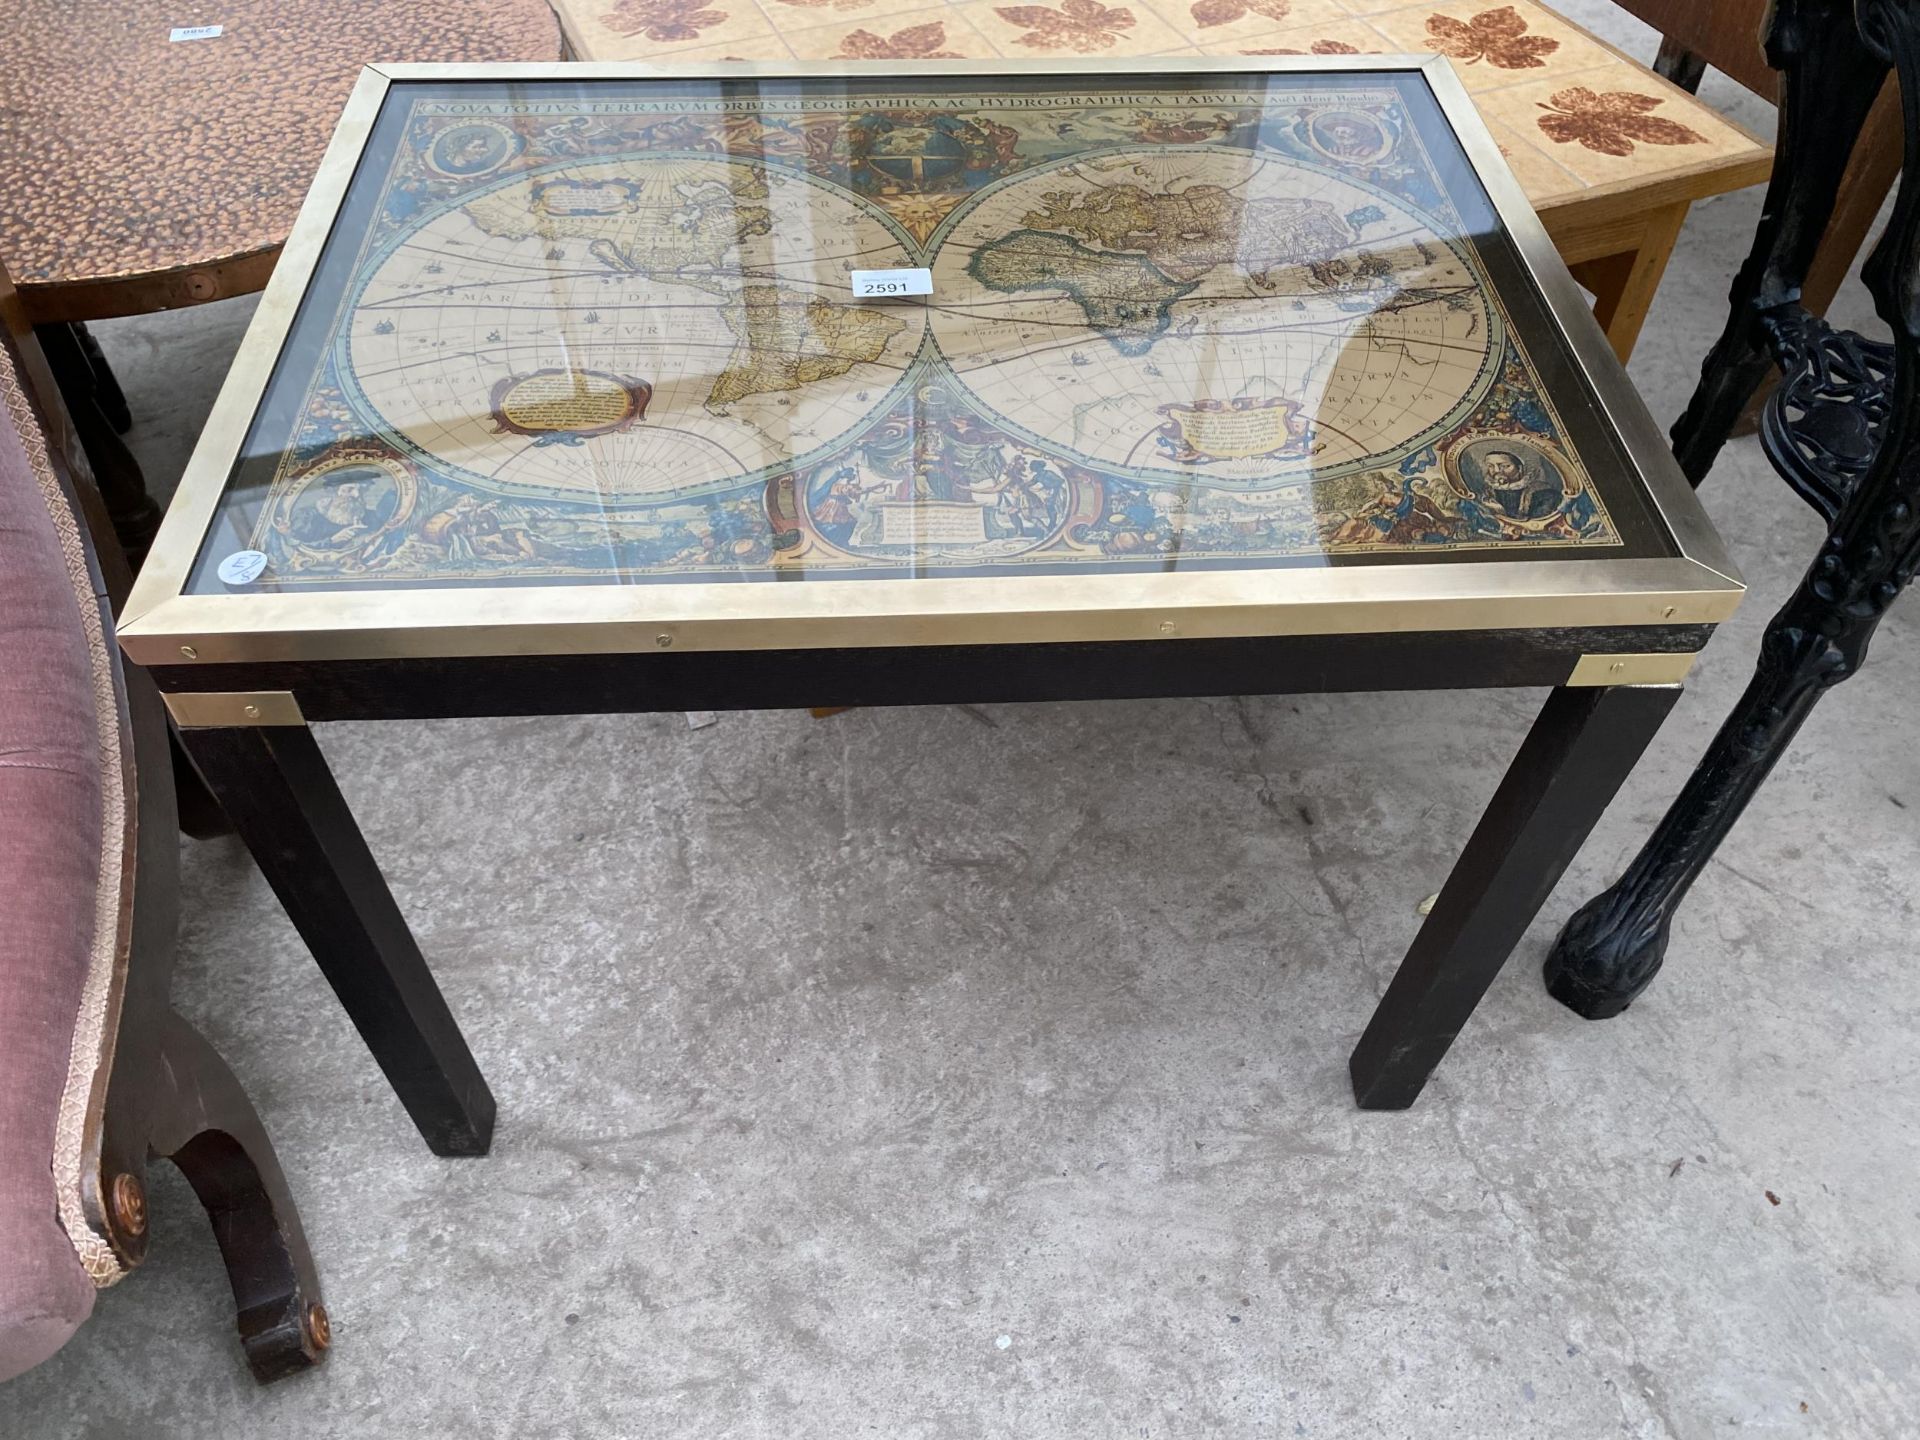 A MODERN COFFEE TABLE, THE TOP INSET WITH VINTAGE STYLE WORLD MAP, 25X18"